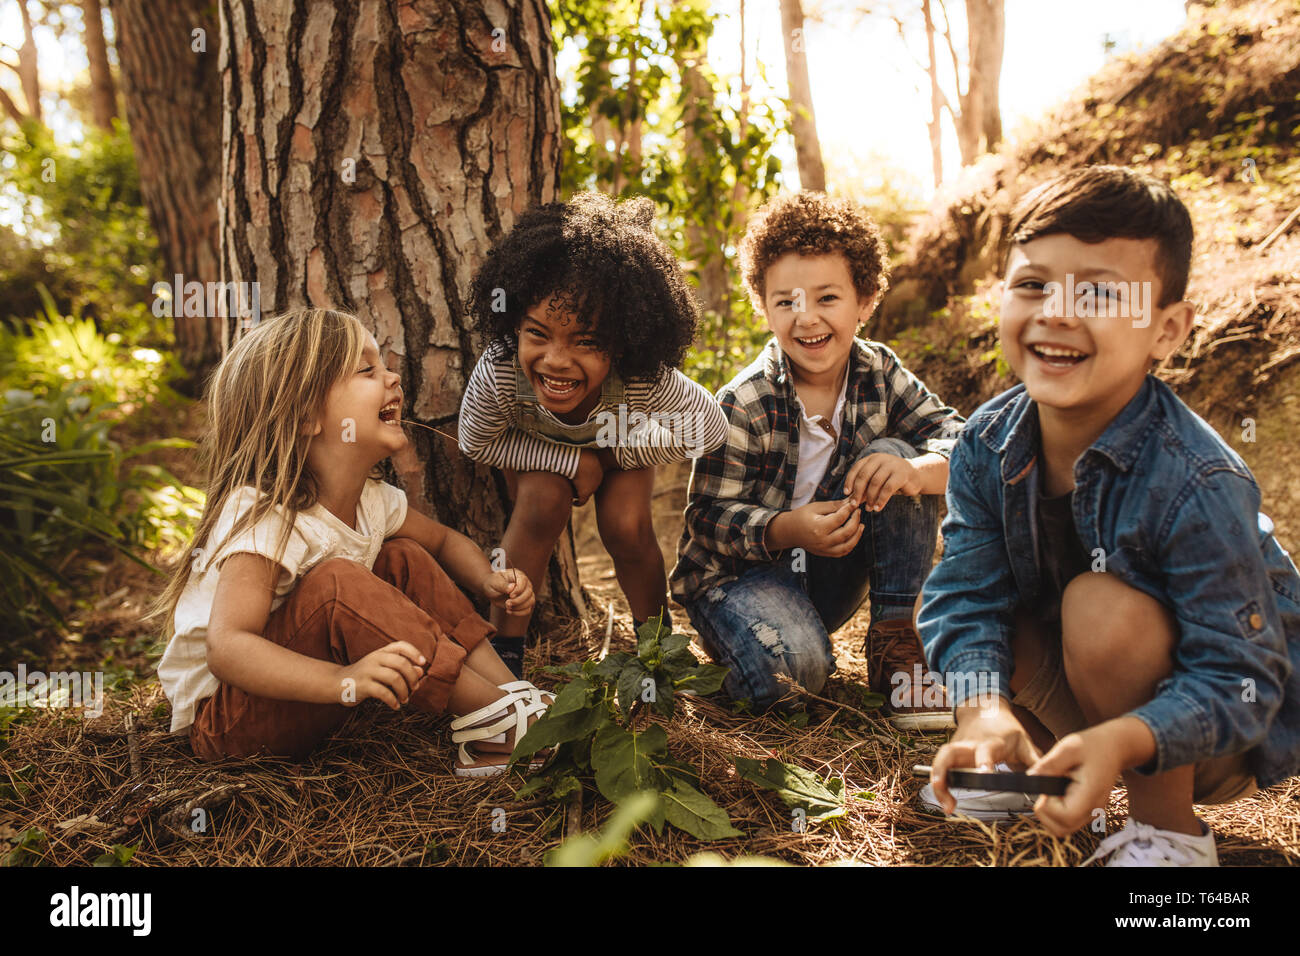 Group of cute kids sitting together in forest and looking at camera. Cute children playing in woods. Stock Photo